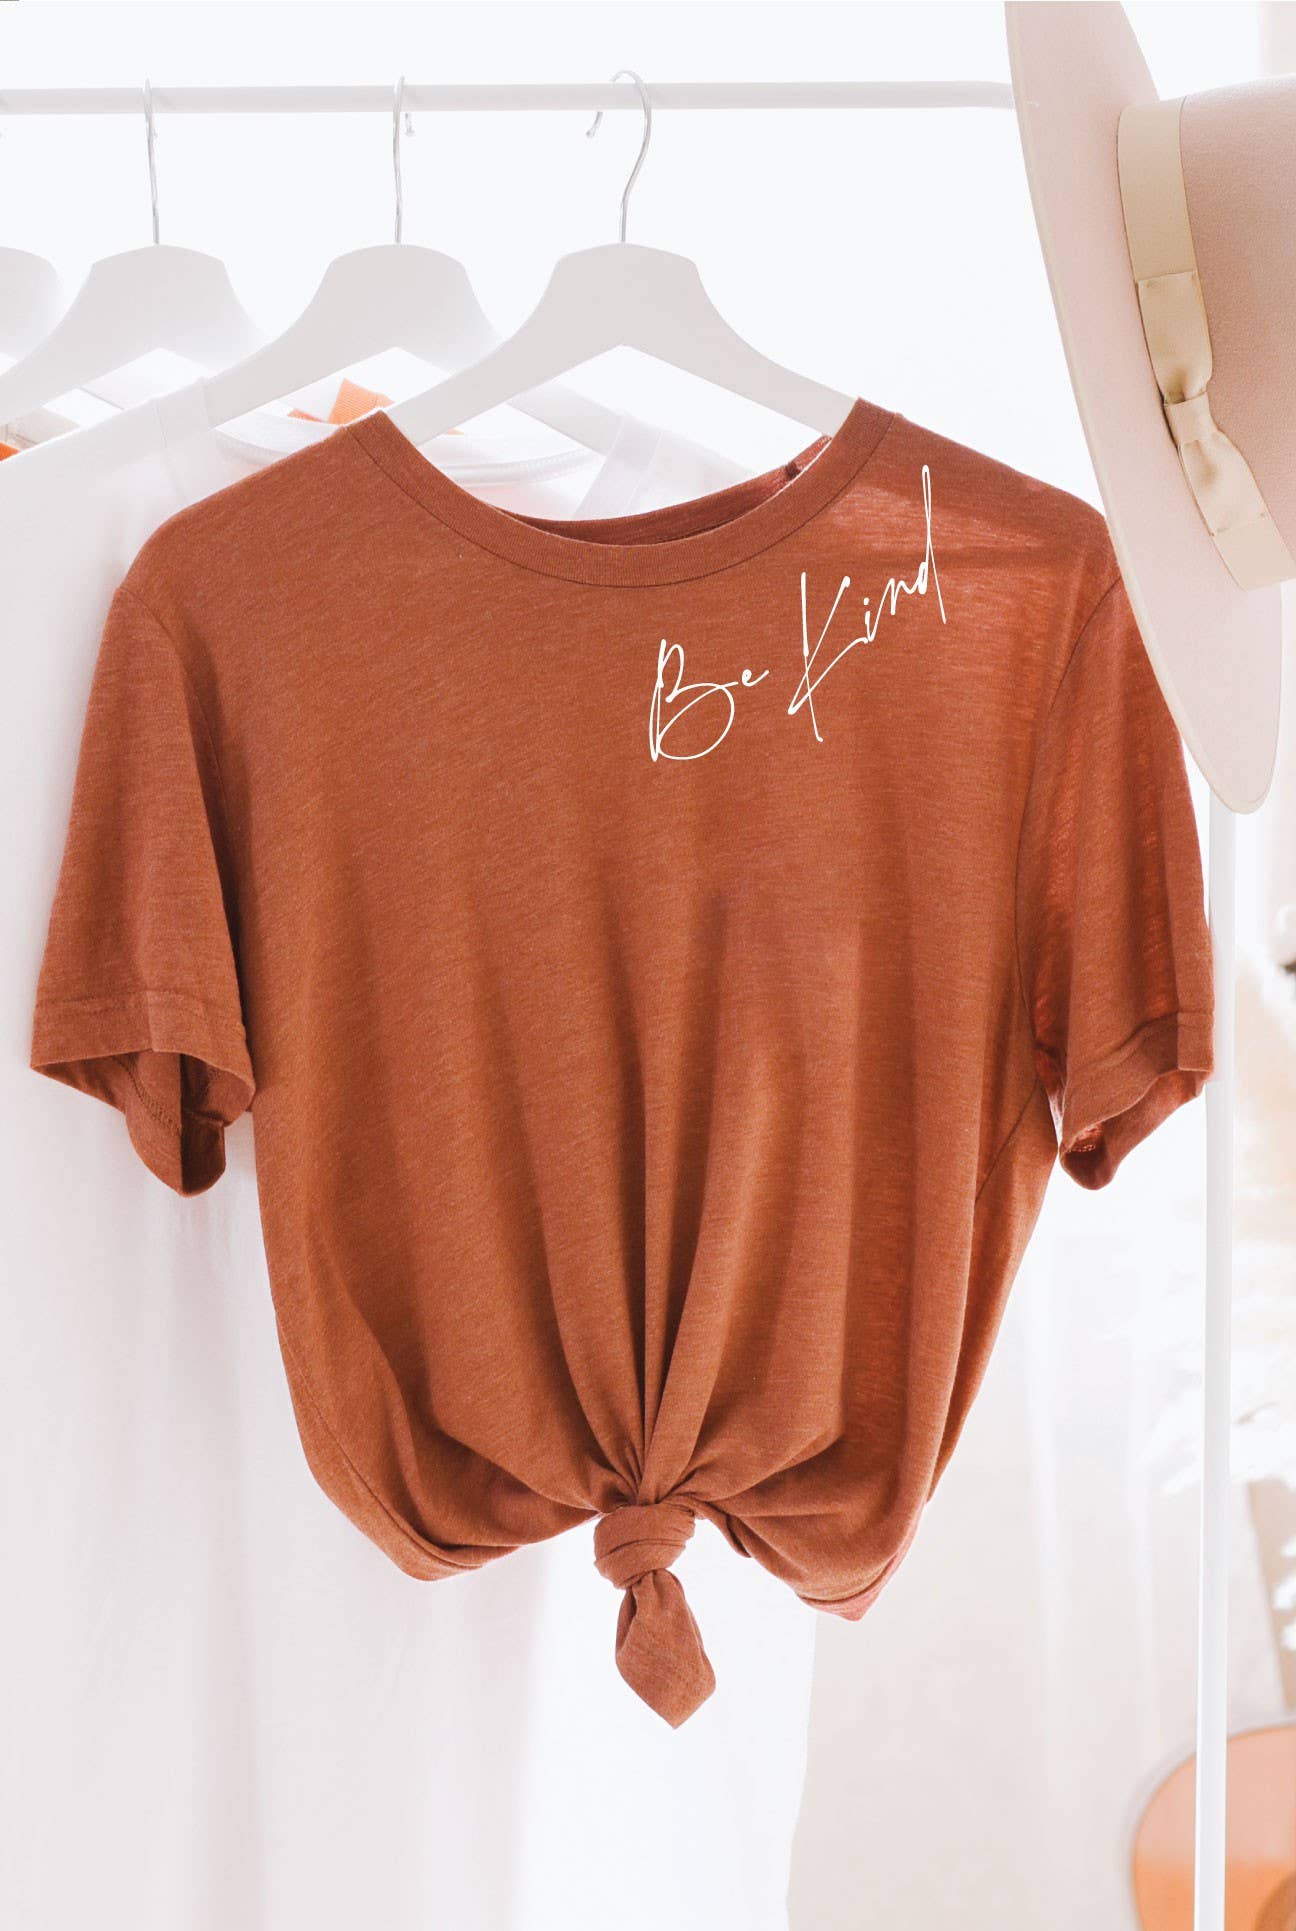 BE KIND Graphic T-Shirt